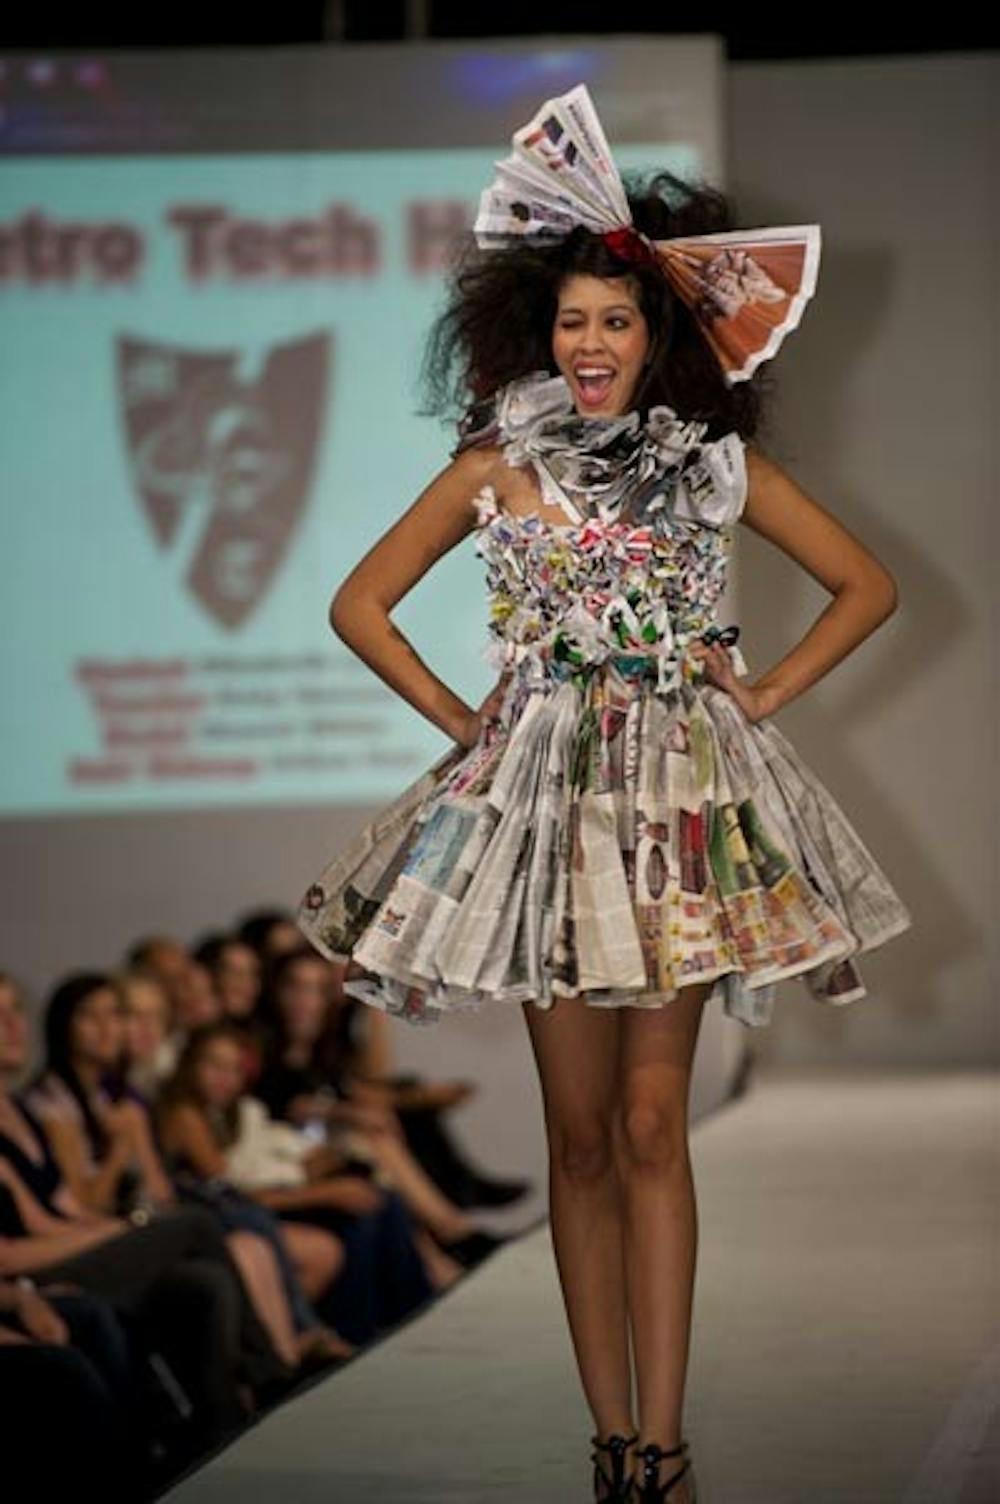 SECOND LIFE RECYCLABLES: ASU student designers were part of Scottsdale Fashion Week Thursday night, where this year’s theme challenged designers to create clothing out of recyclable materials such as newspapers and plastic bottles. (Photo by Michael Arellano)